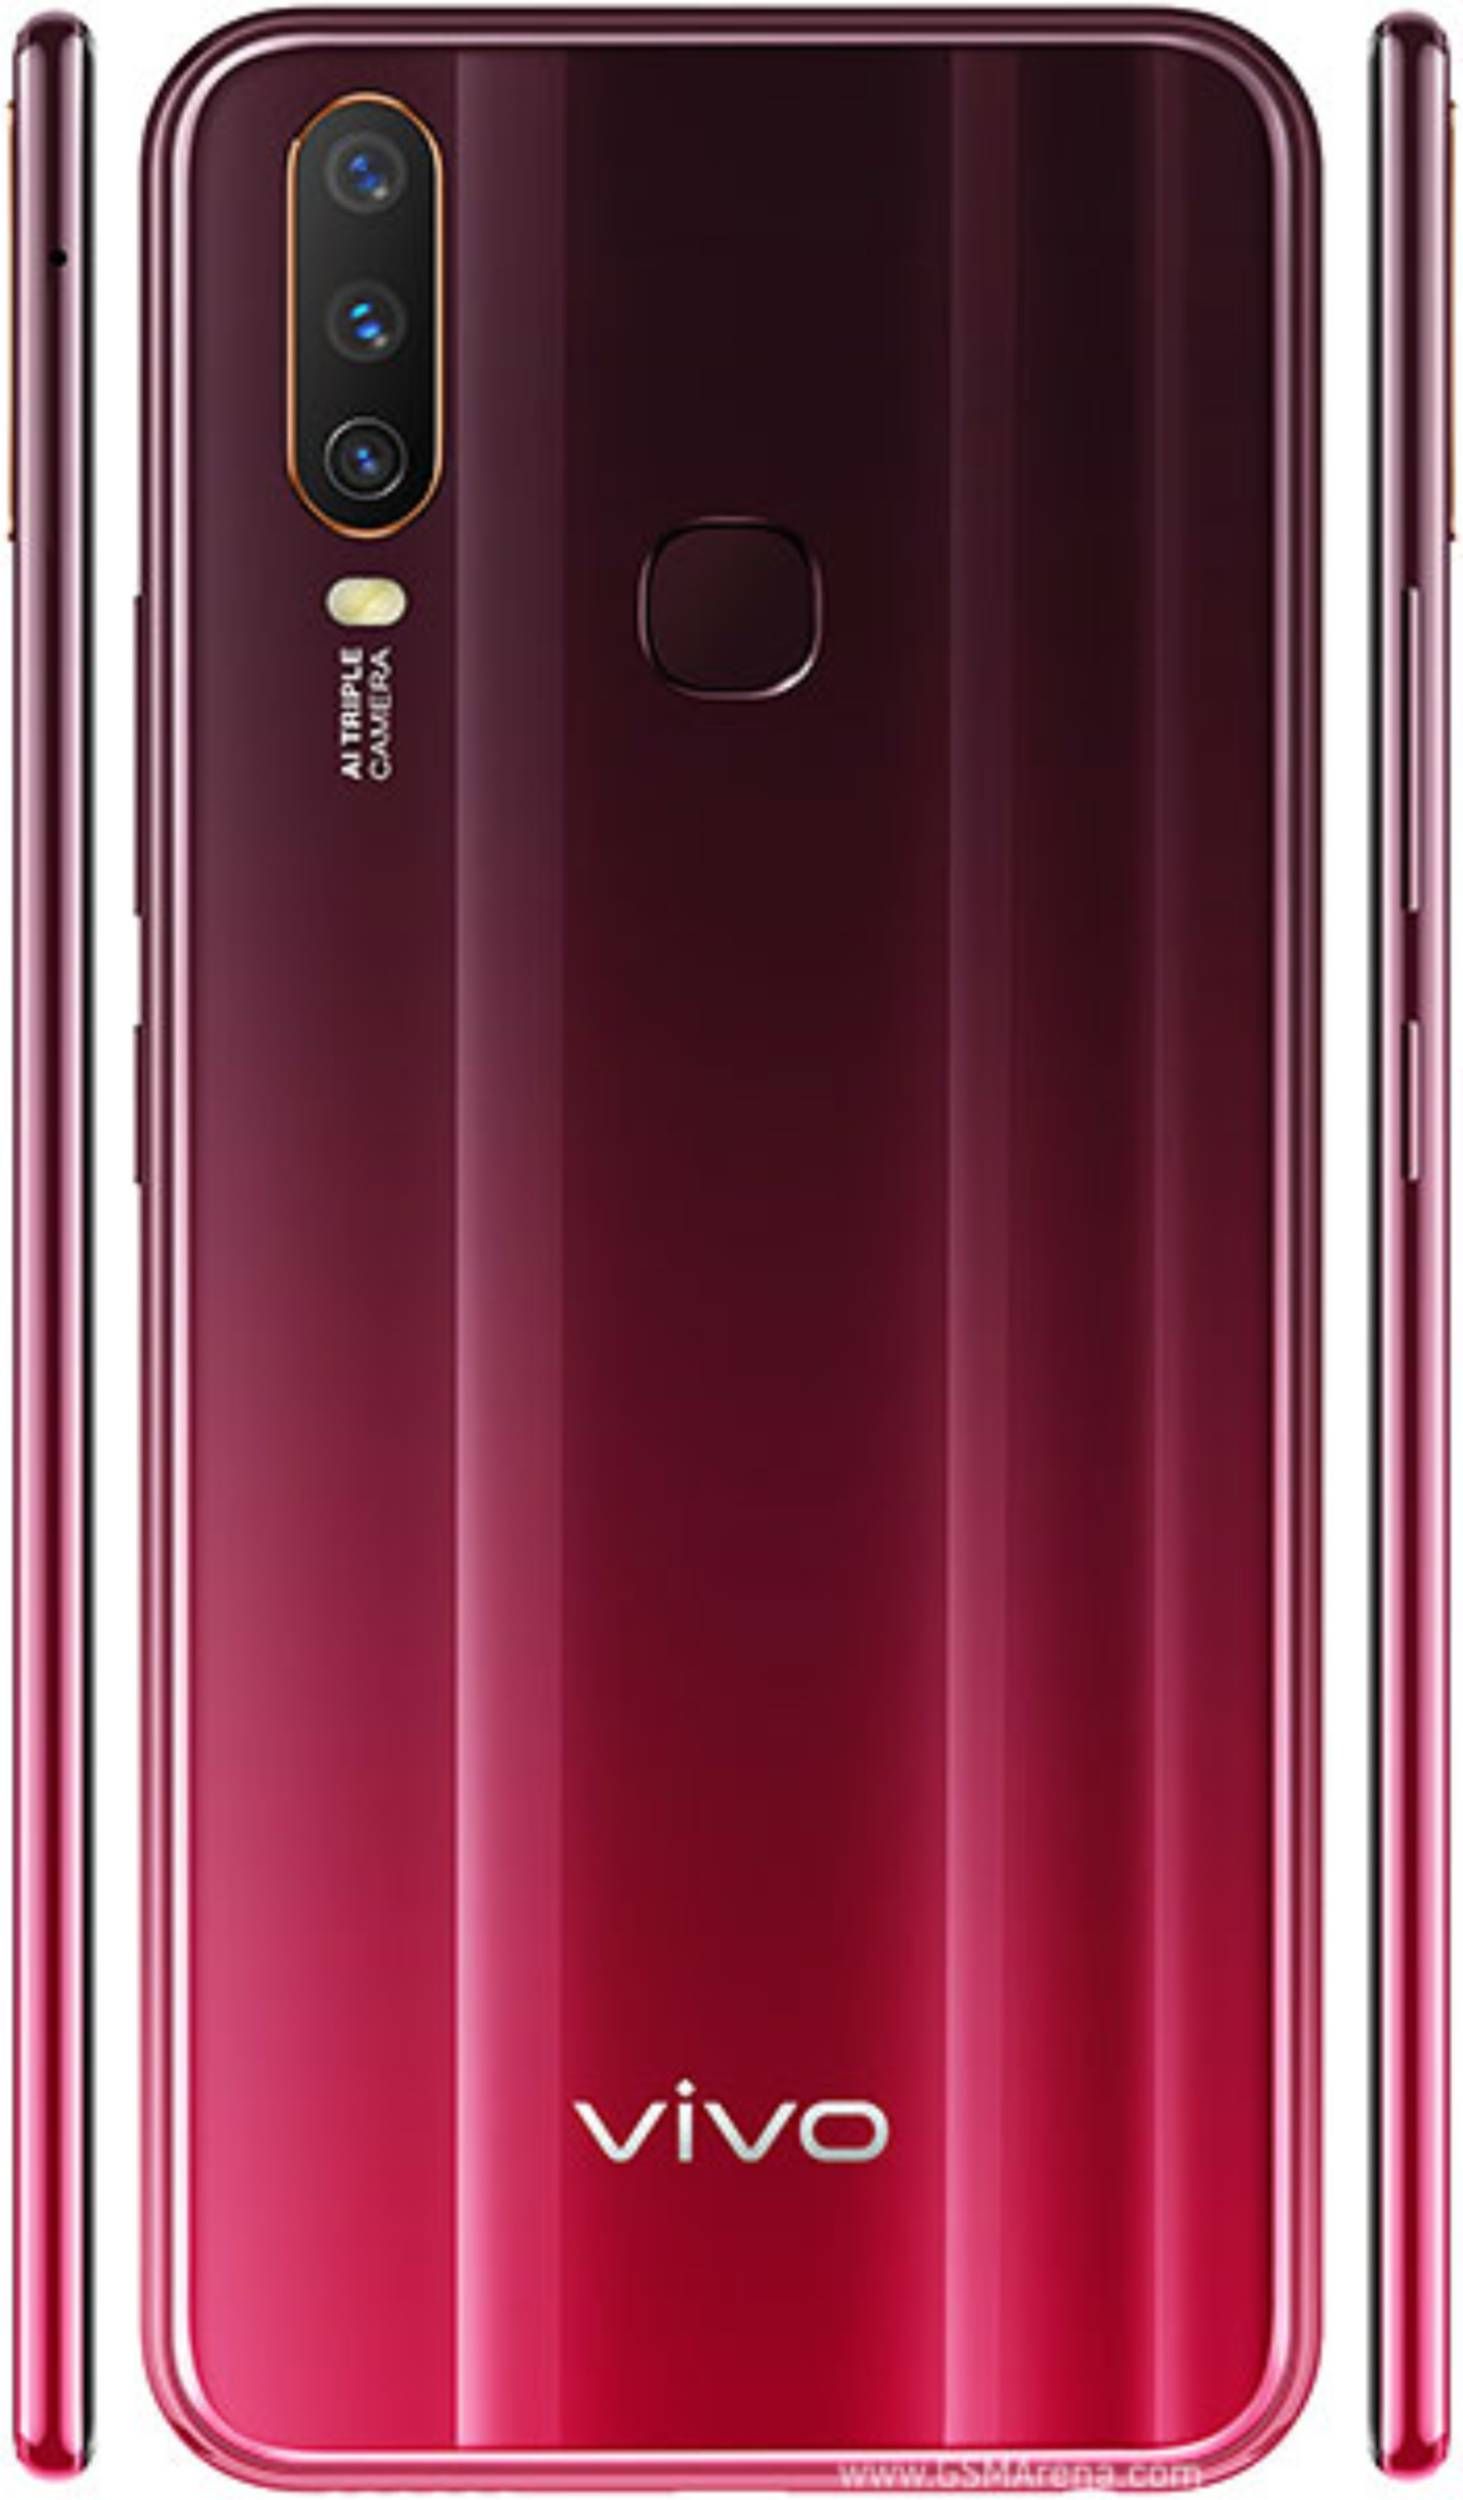 Vivo Y15 Specifications and Price in Kenya